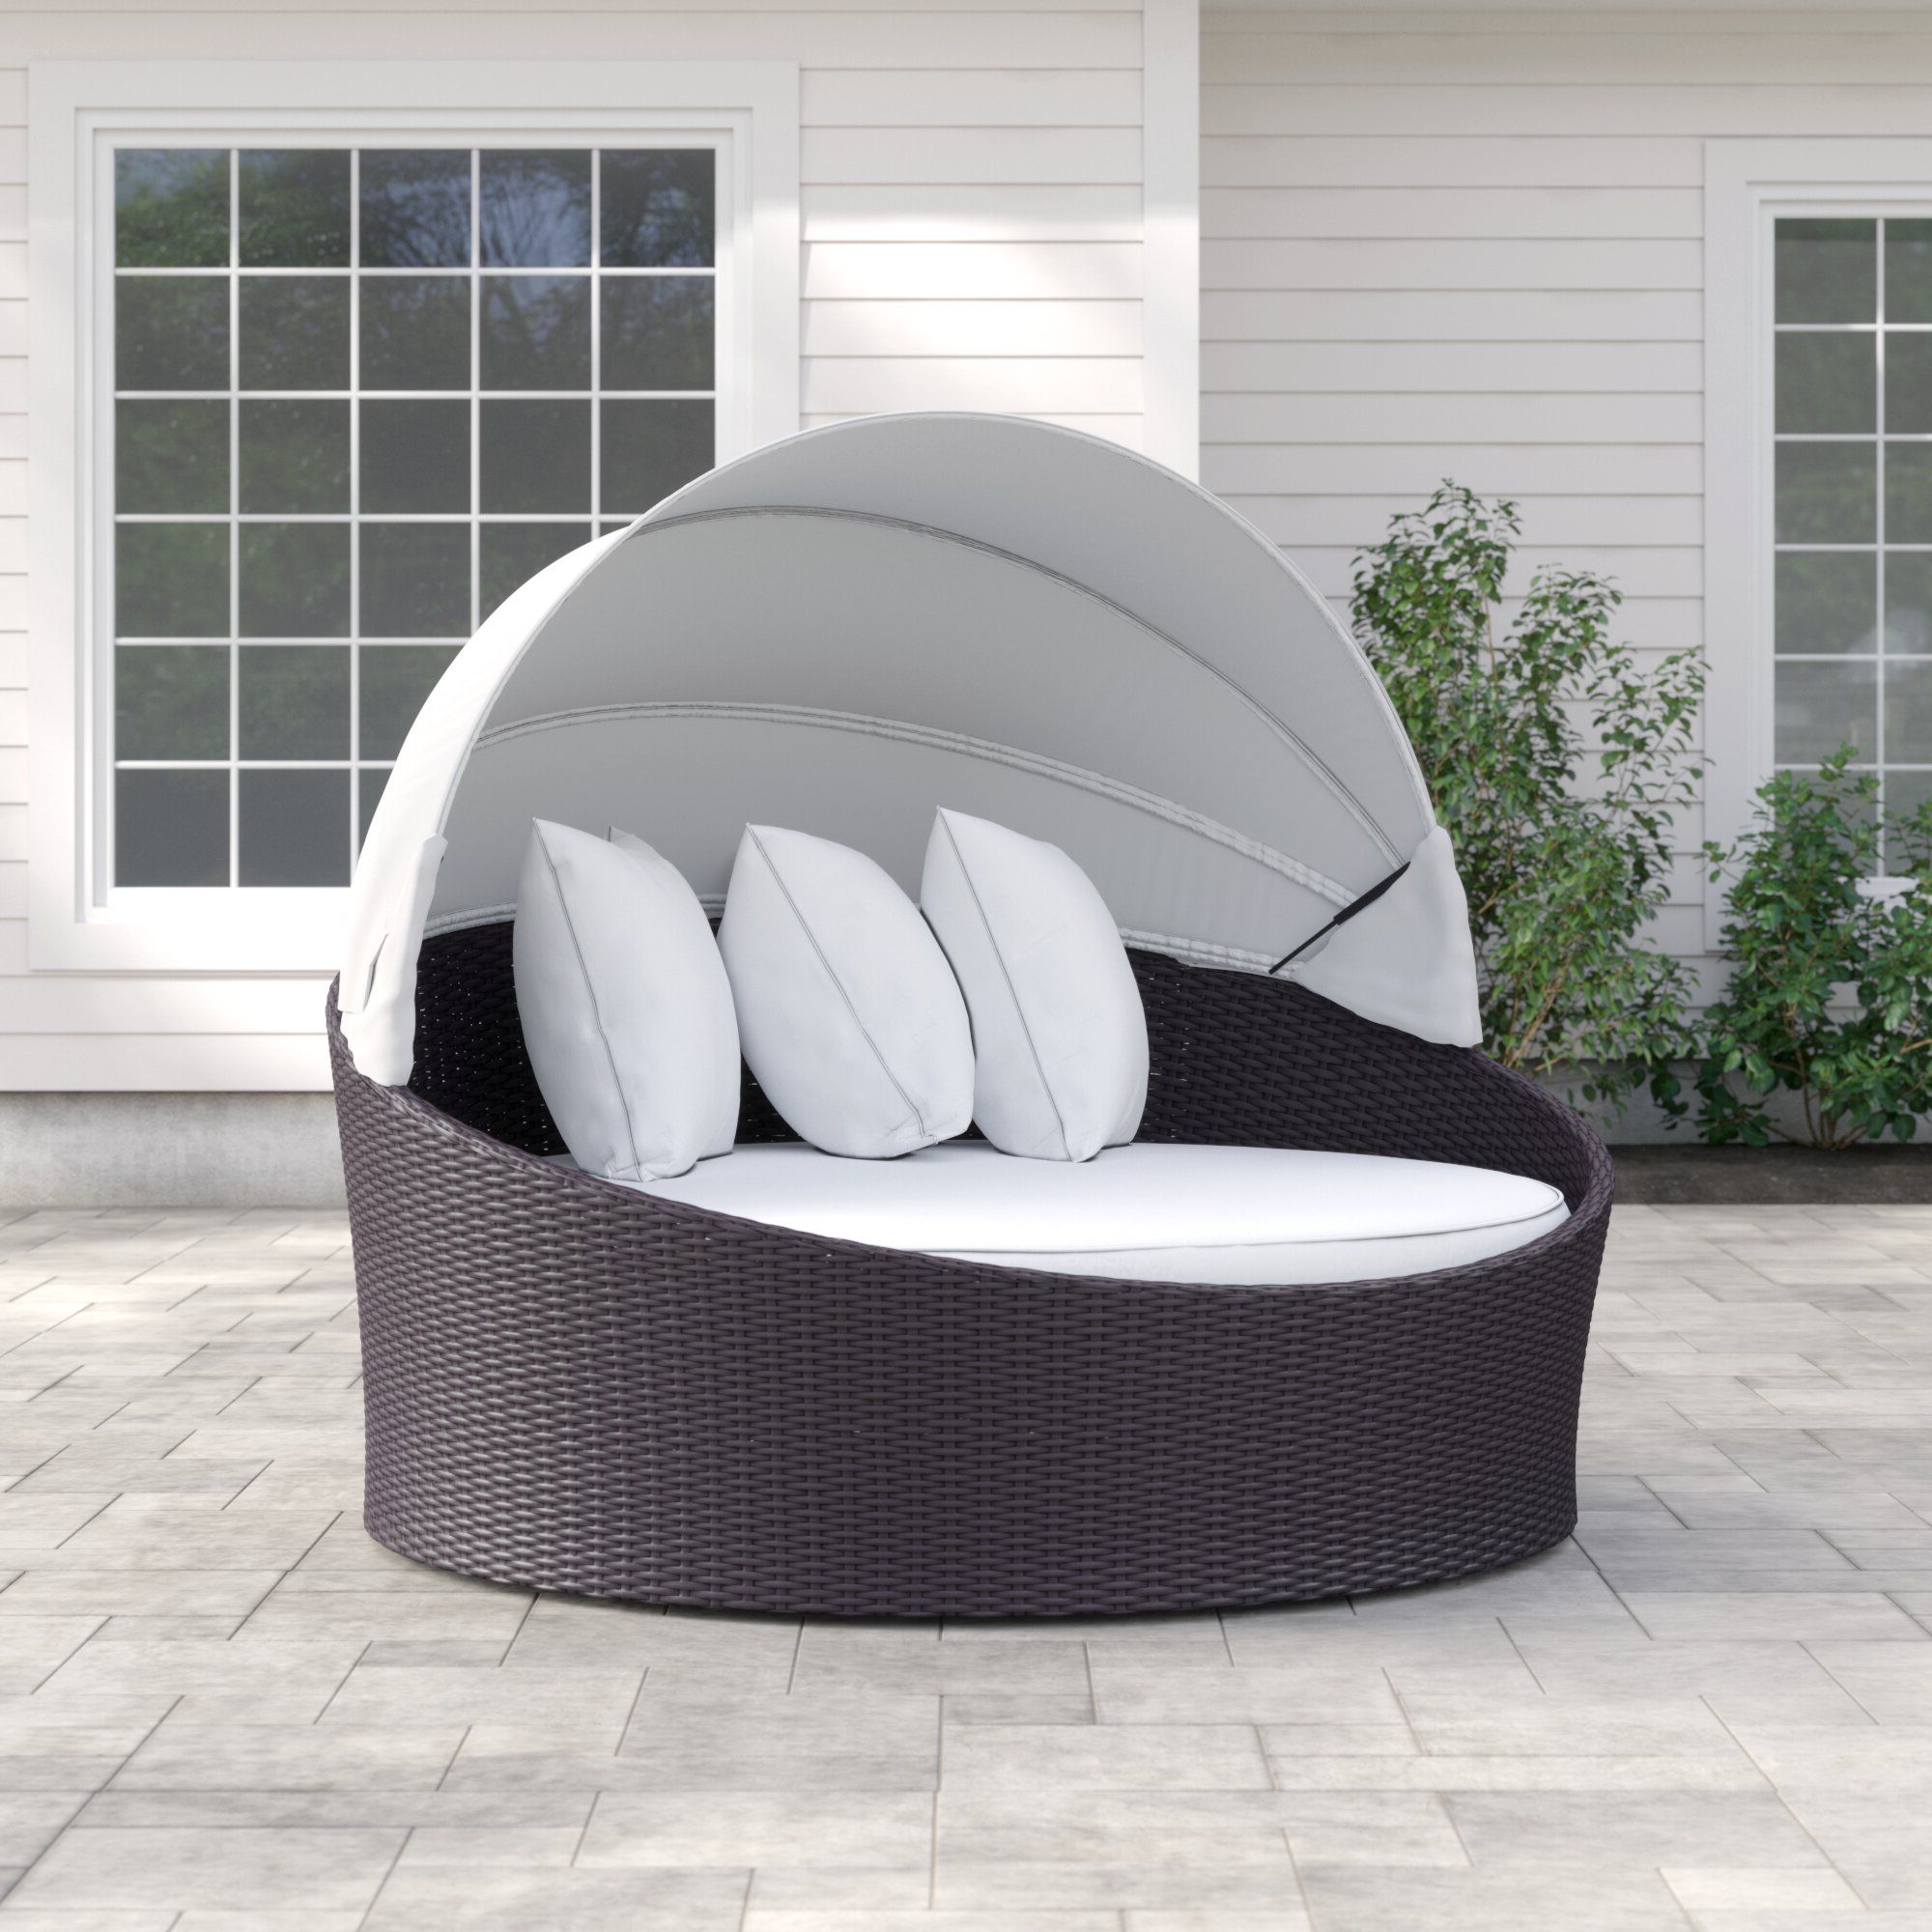 Brentwood Canopy Patio Daybeds With Cushions Pertaining To Best And Newest Brentwood Canopy Patio Daybed With Cushions (View 1 of 25)